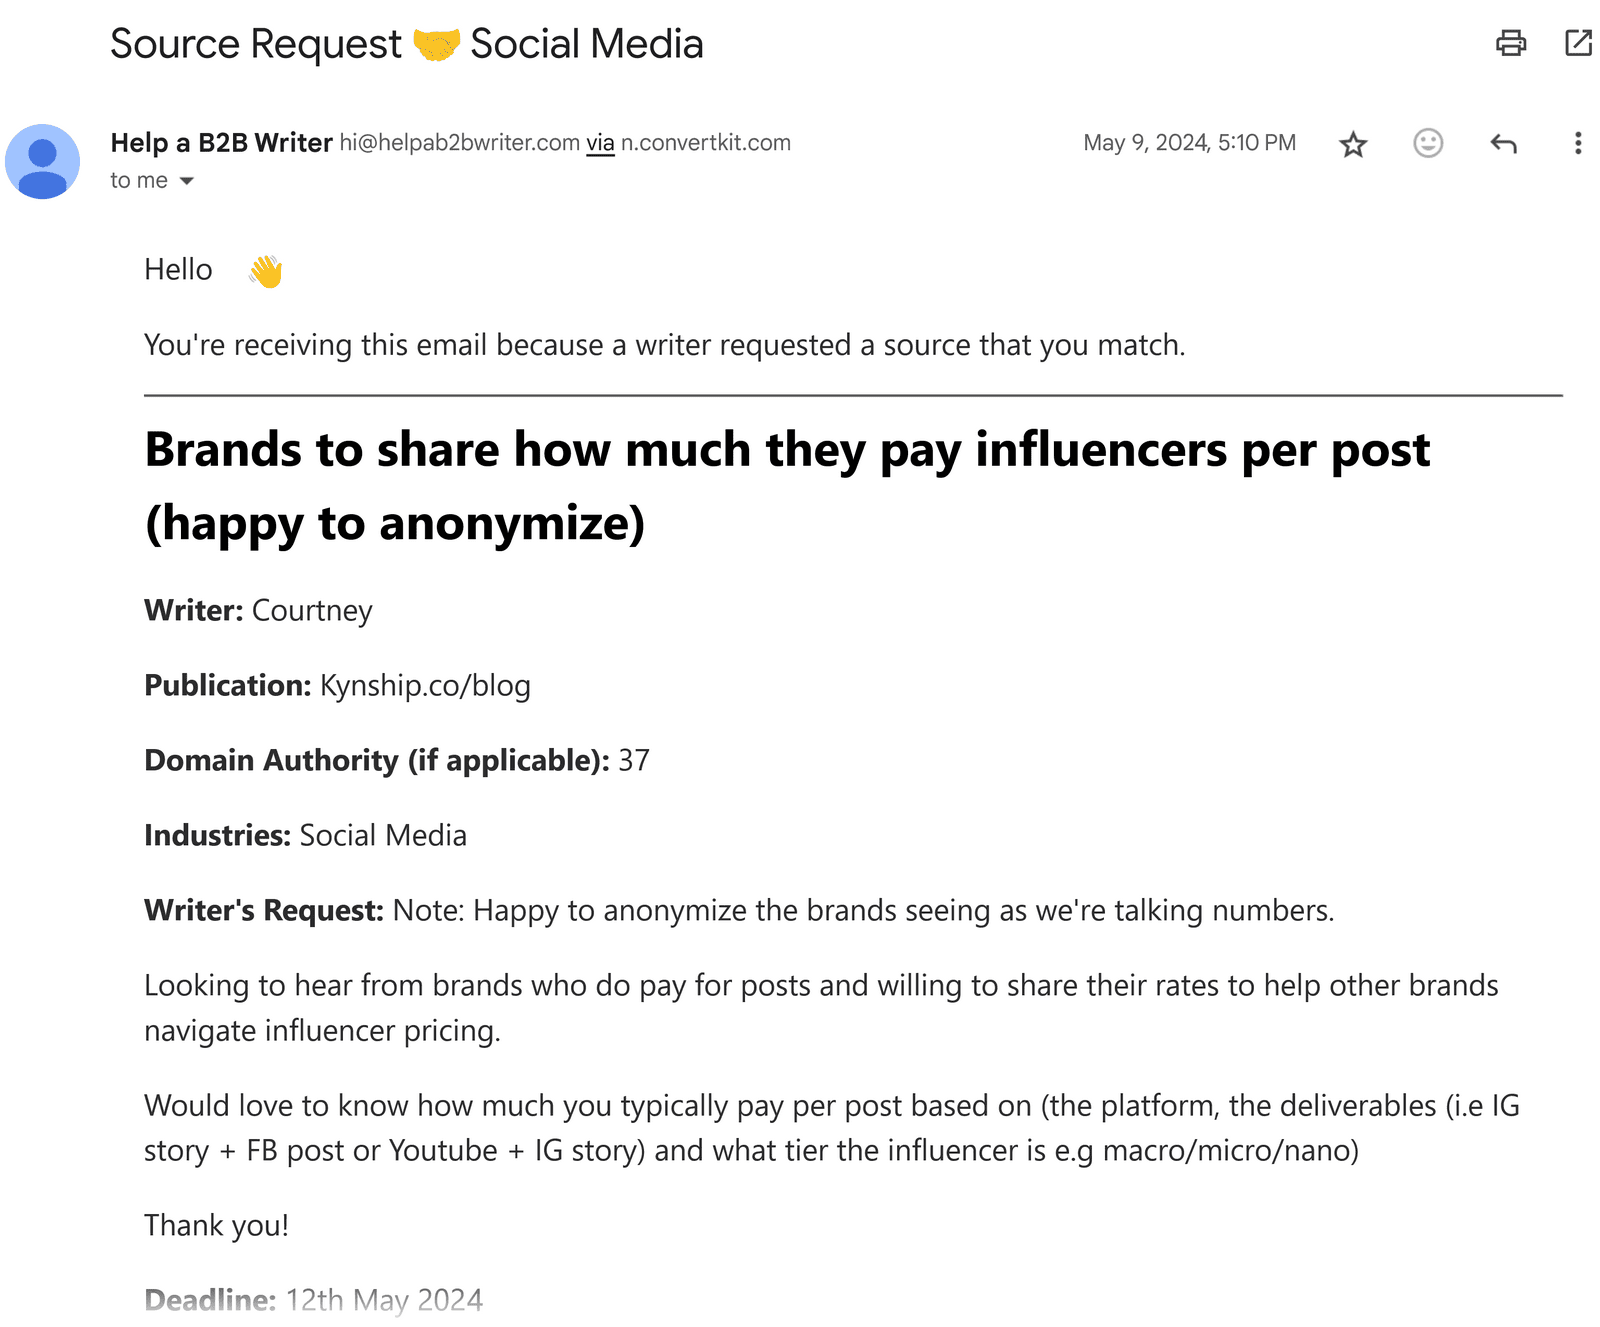 Section of an email requesting brands to share how much they pay influencers per post, for a social media article.